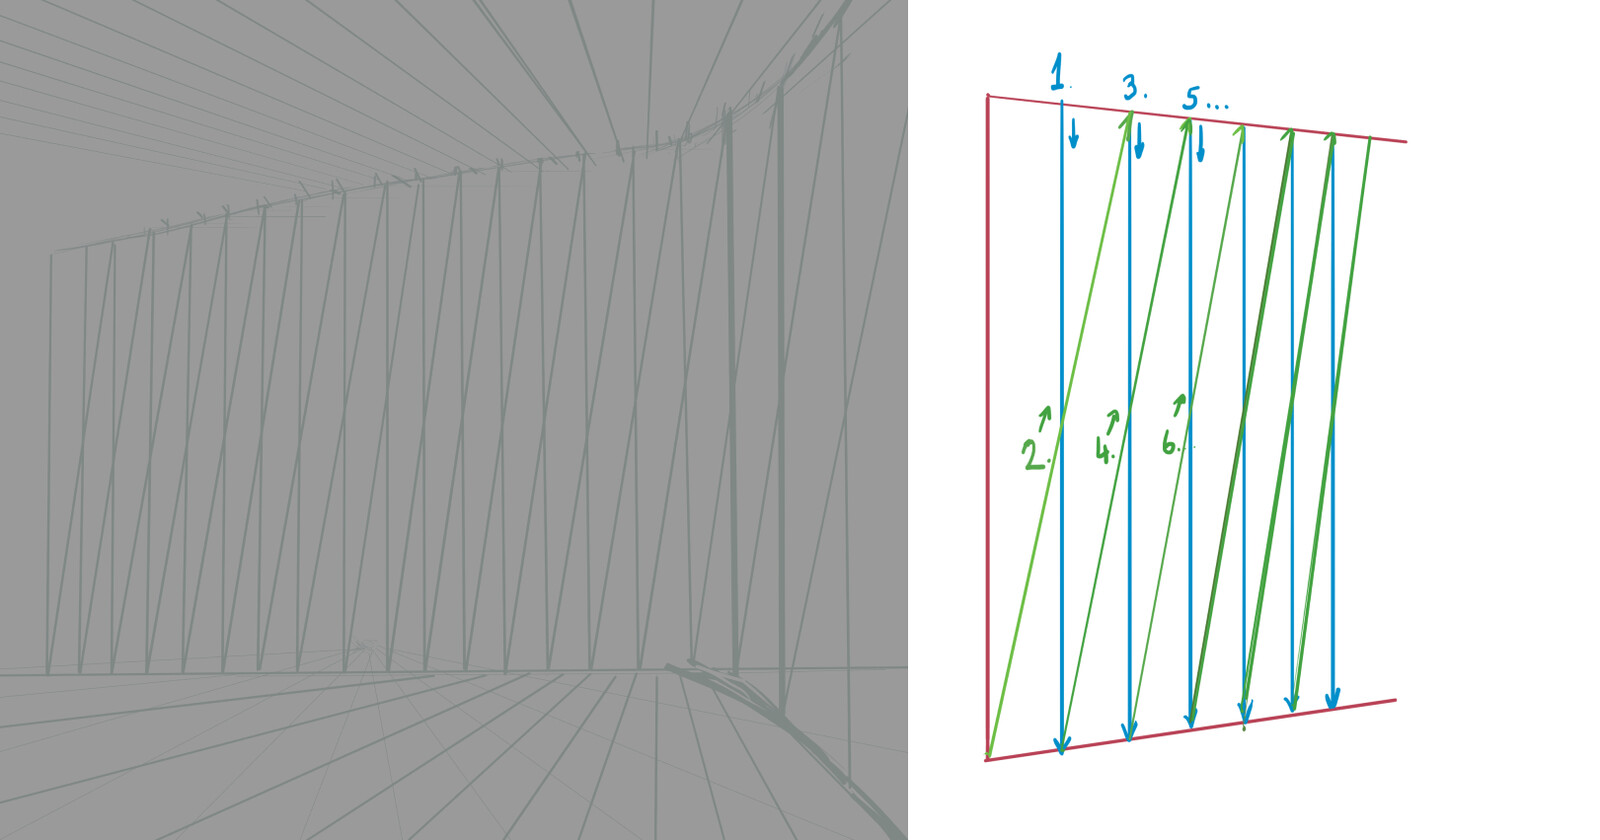 'The method I use is to draw the width of the closest plank first (1). I then draw a line (2) from the bottom corner of the first plank, diagonally through the middle of line 1, and up to the top. I draw a straight line down from that point (3)...'